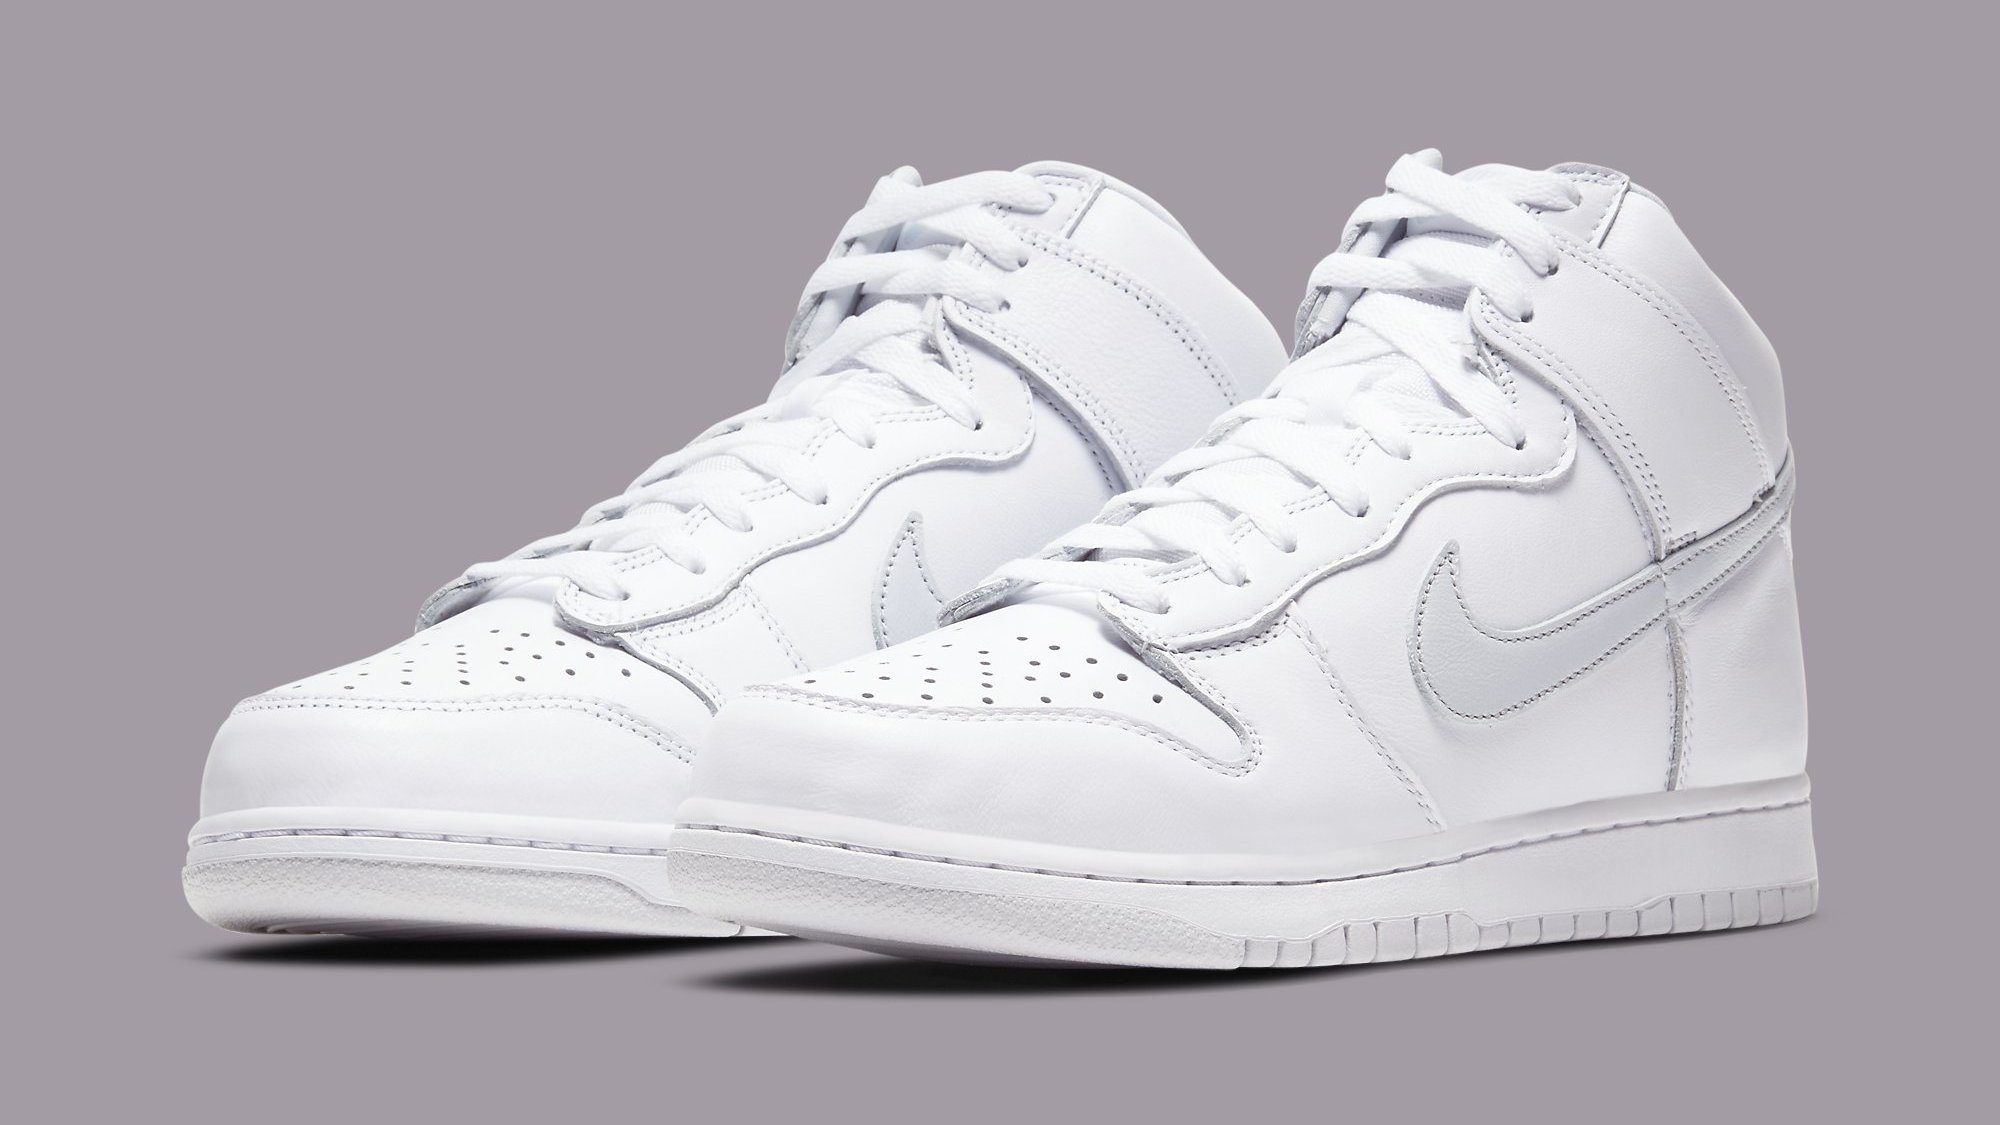 Pure Platinum' Nike Dunk Highs Are Releasing Soon | Complex